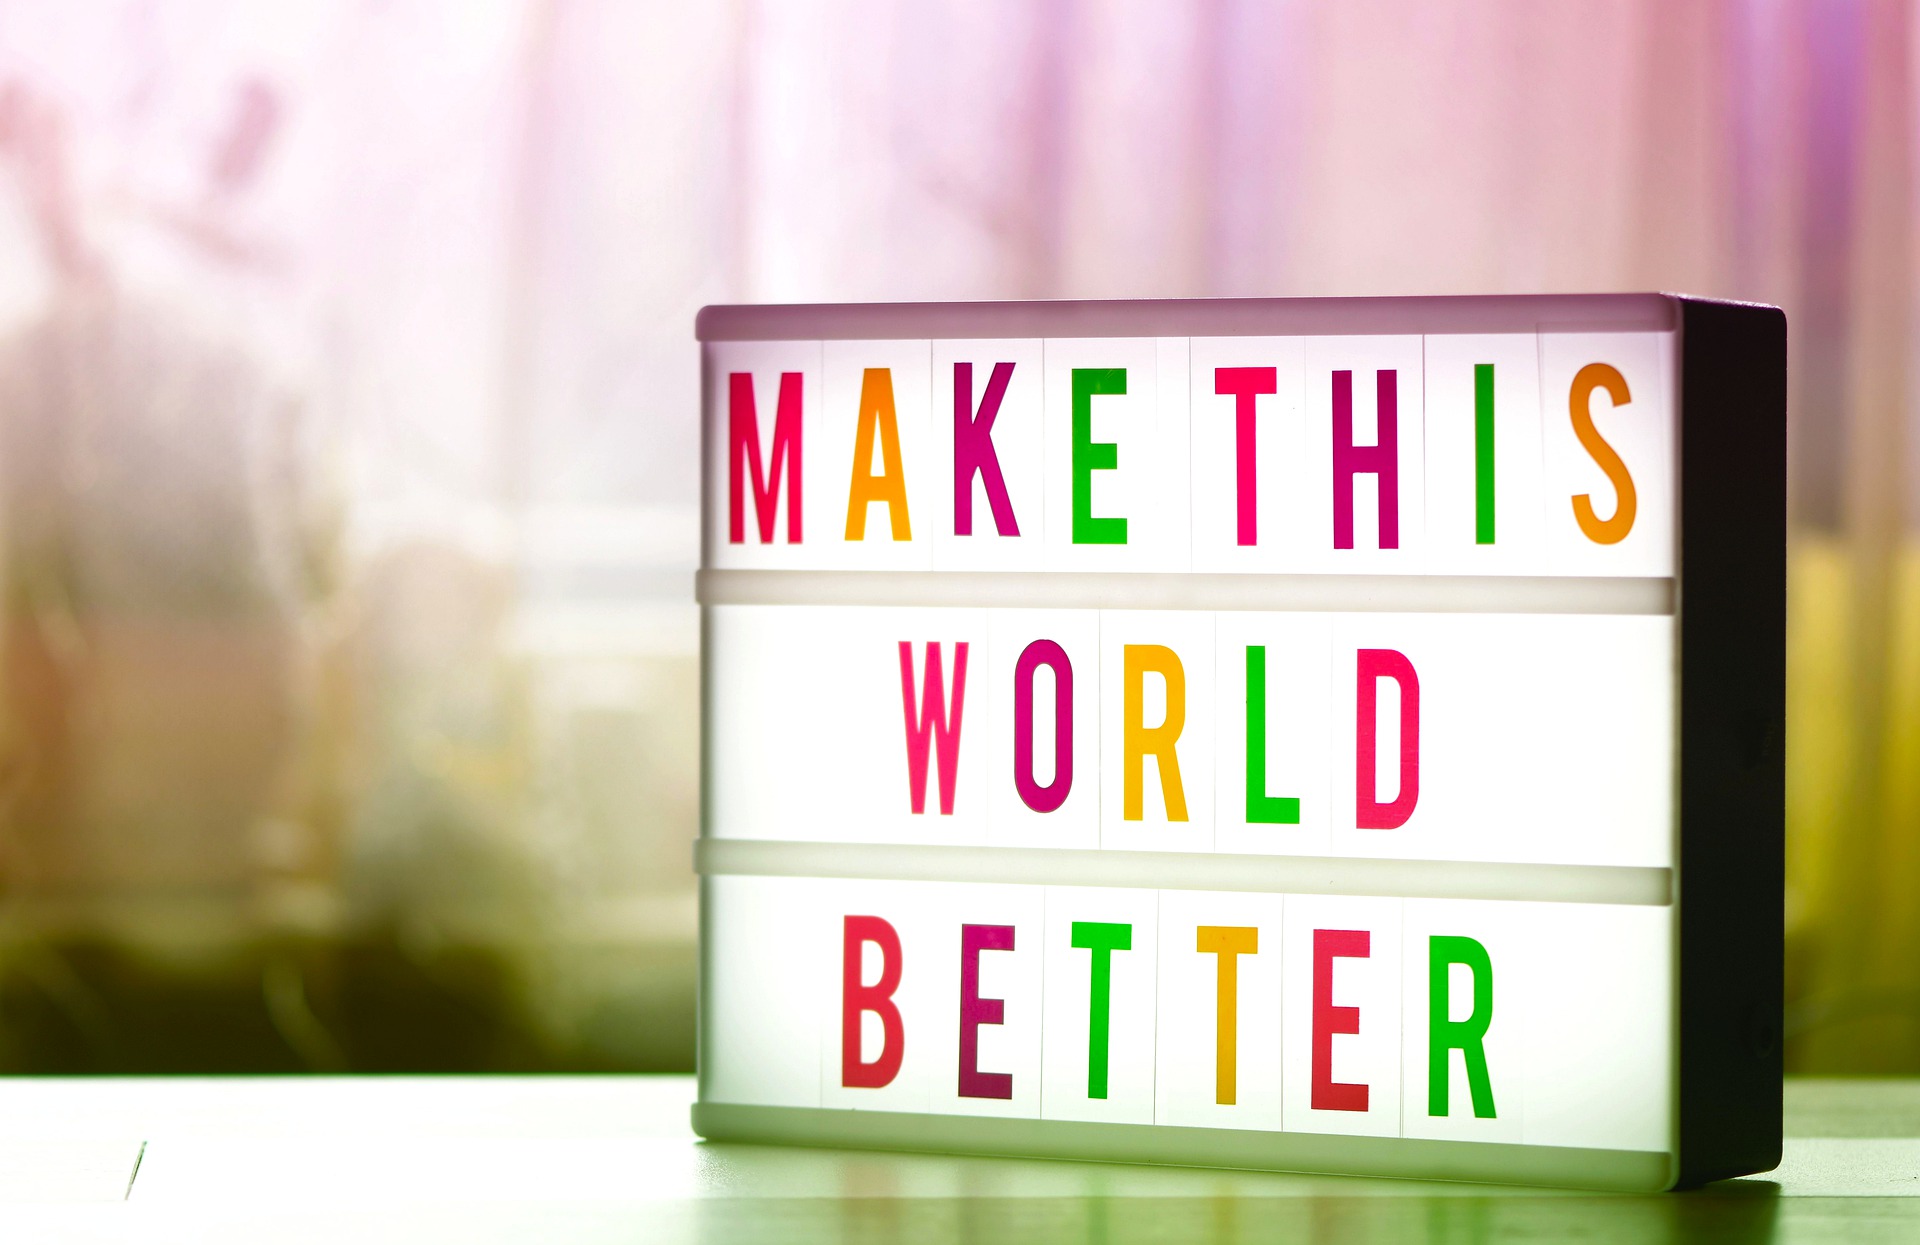 Photograph of a sign board reading "Make this world better."